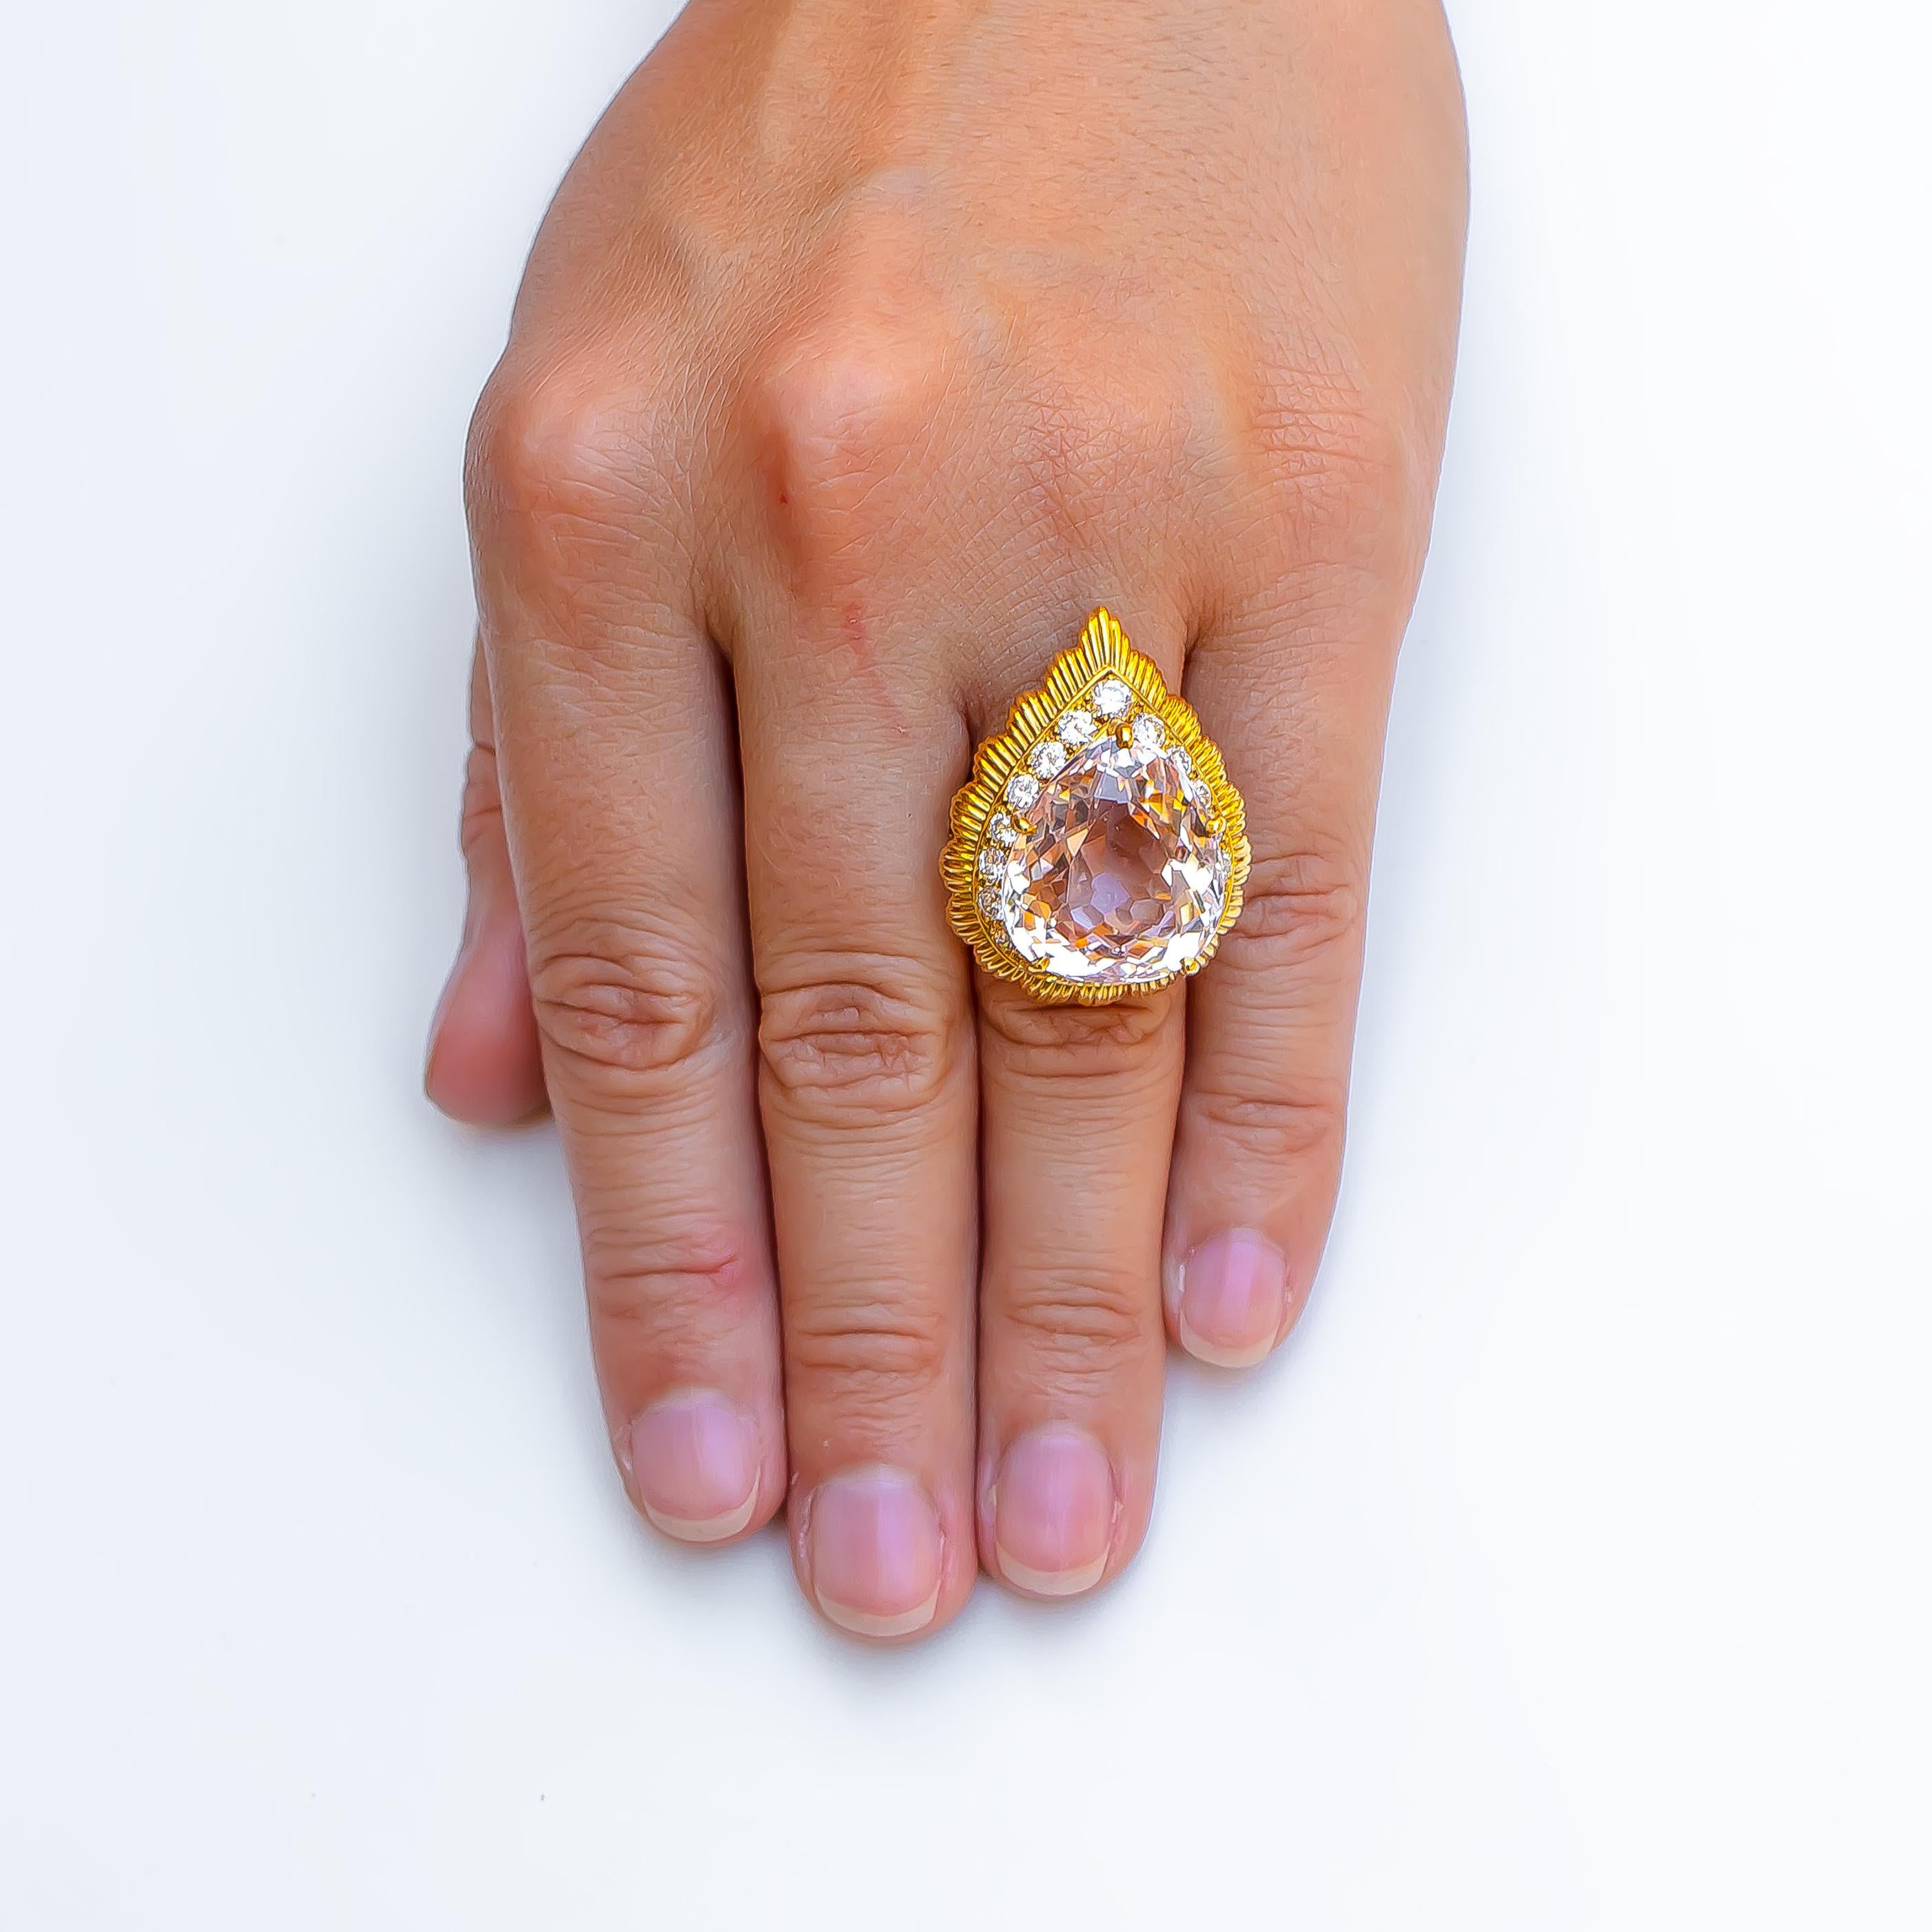 Brand: Van Cleef & Arpels (Signed)

Kunzite: 20 carats

Round Diamonds: 2.50 carats
Color: F
Clarity: VS

Metal: 18K Yellow Gold

Size: 6.5
Complimentary Resizing Available

Condition: Excellent (Previously Owned)